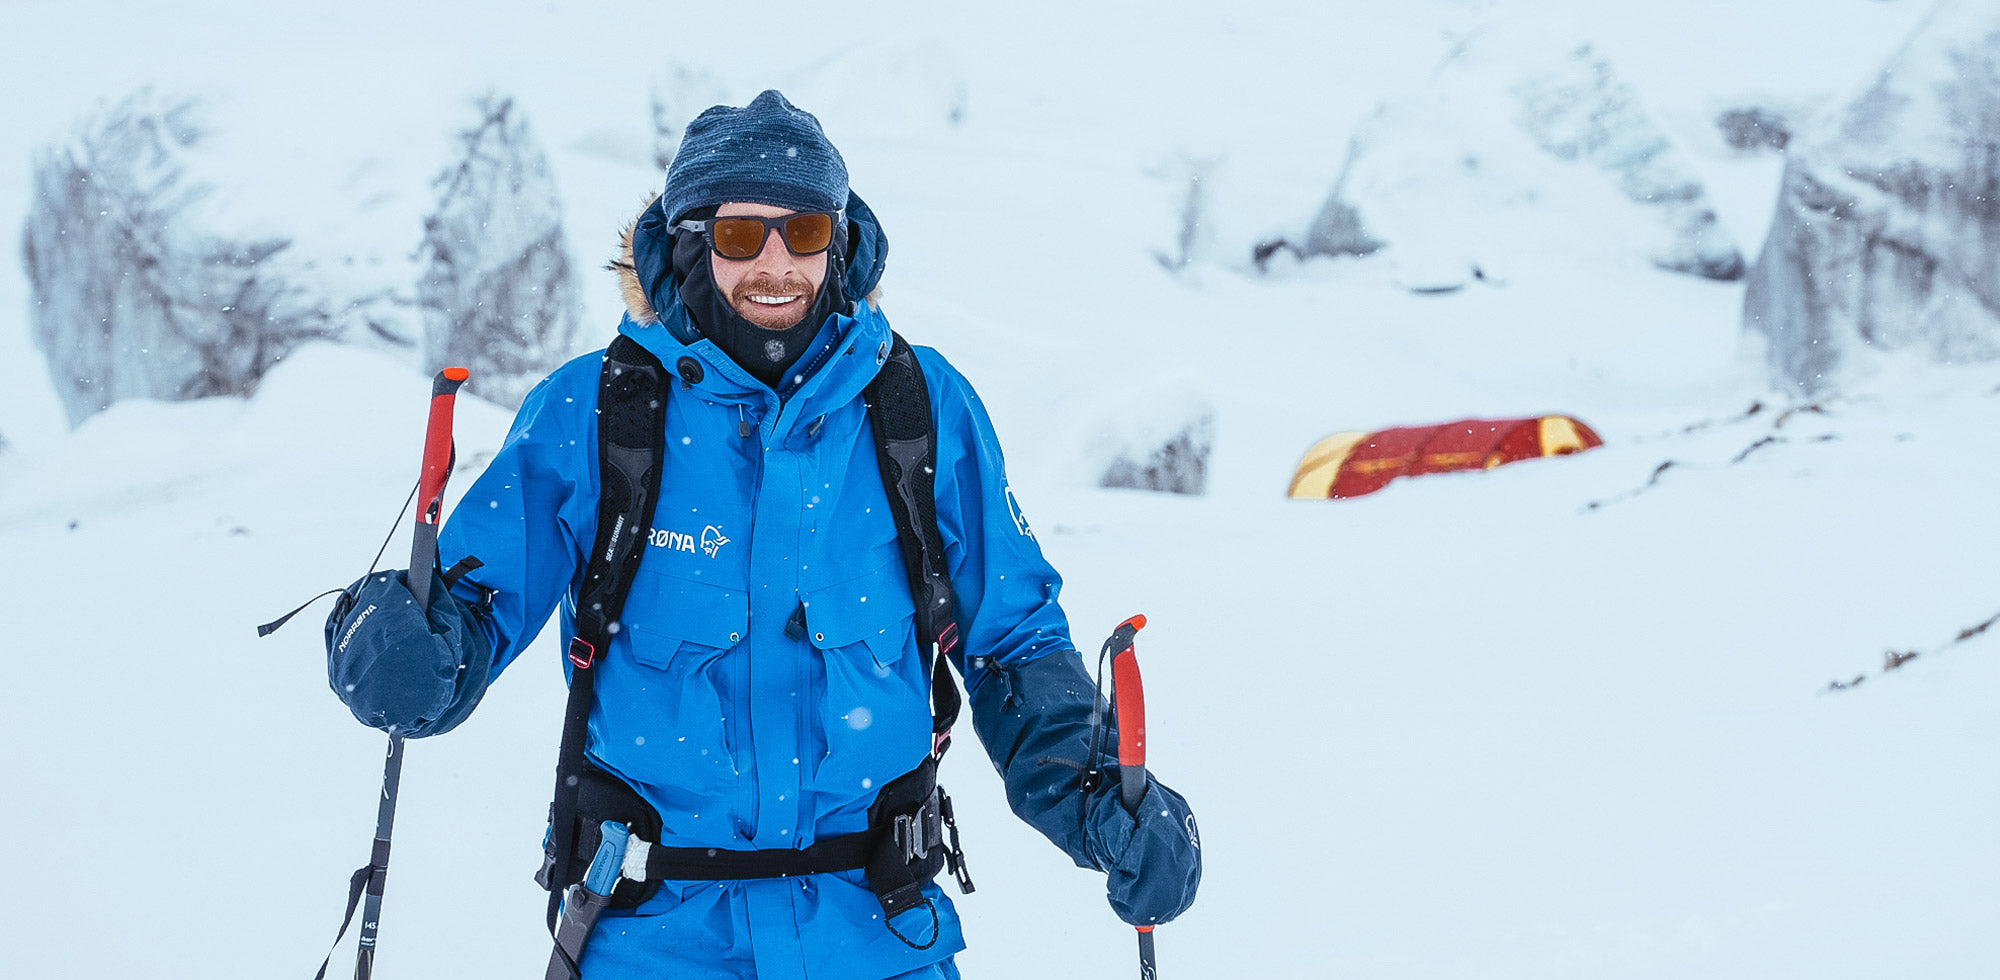 Emerging Gear: Backcountry Vest, Sunglasses for Snow Glare, and